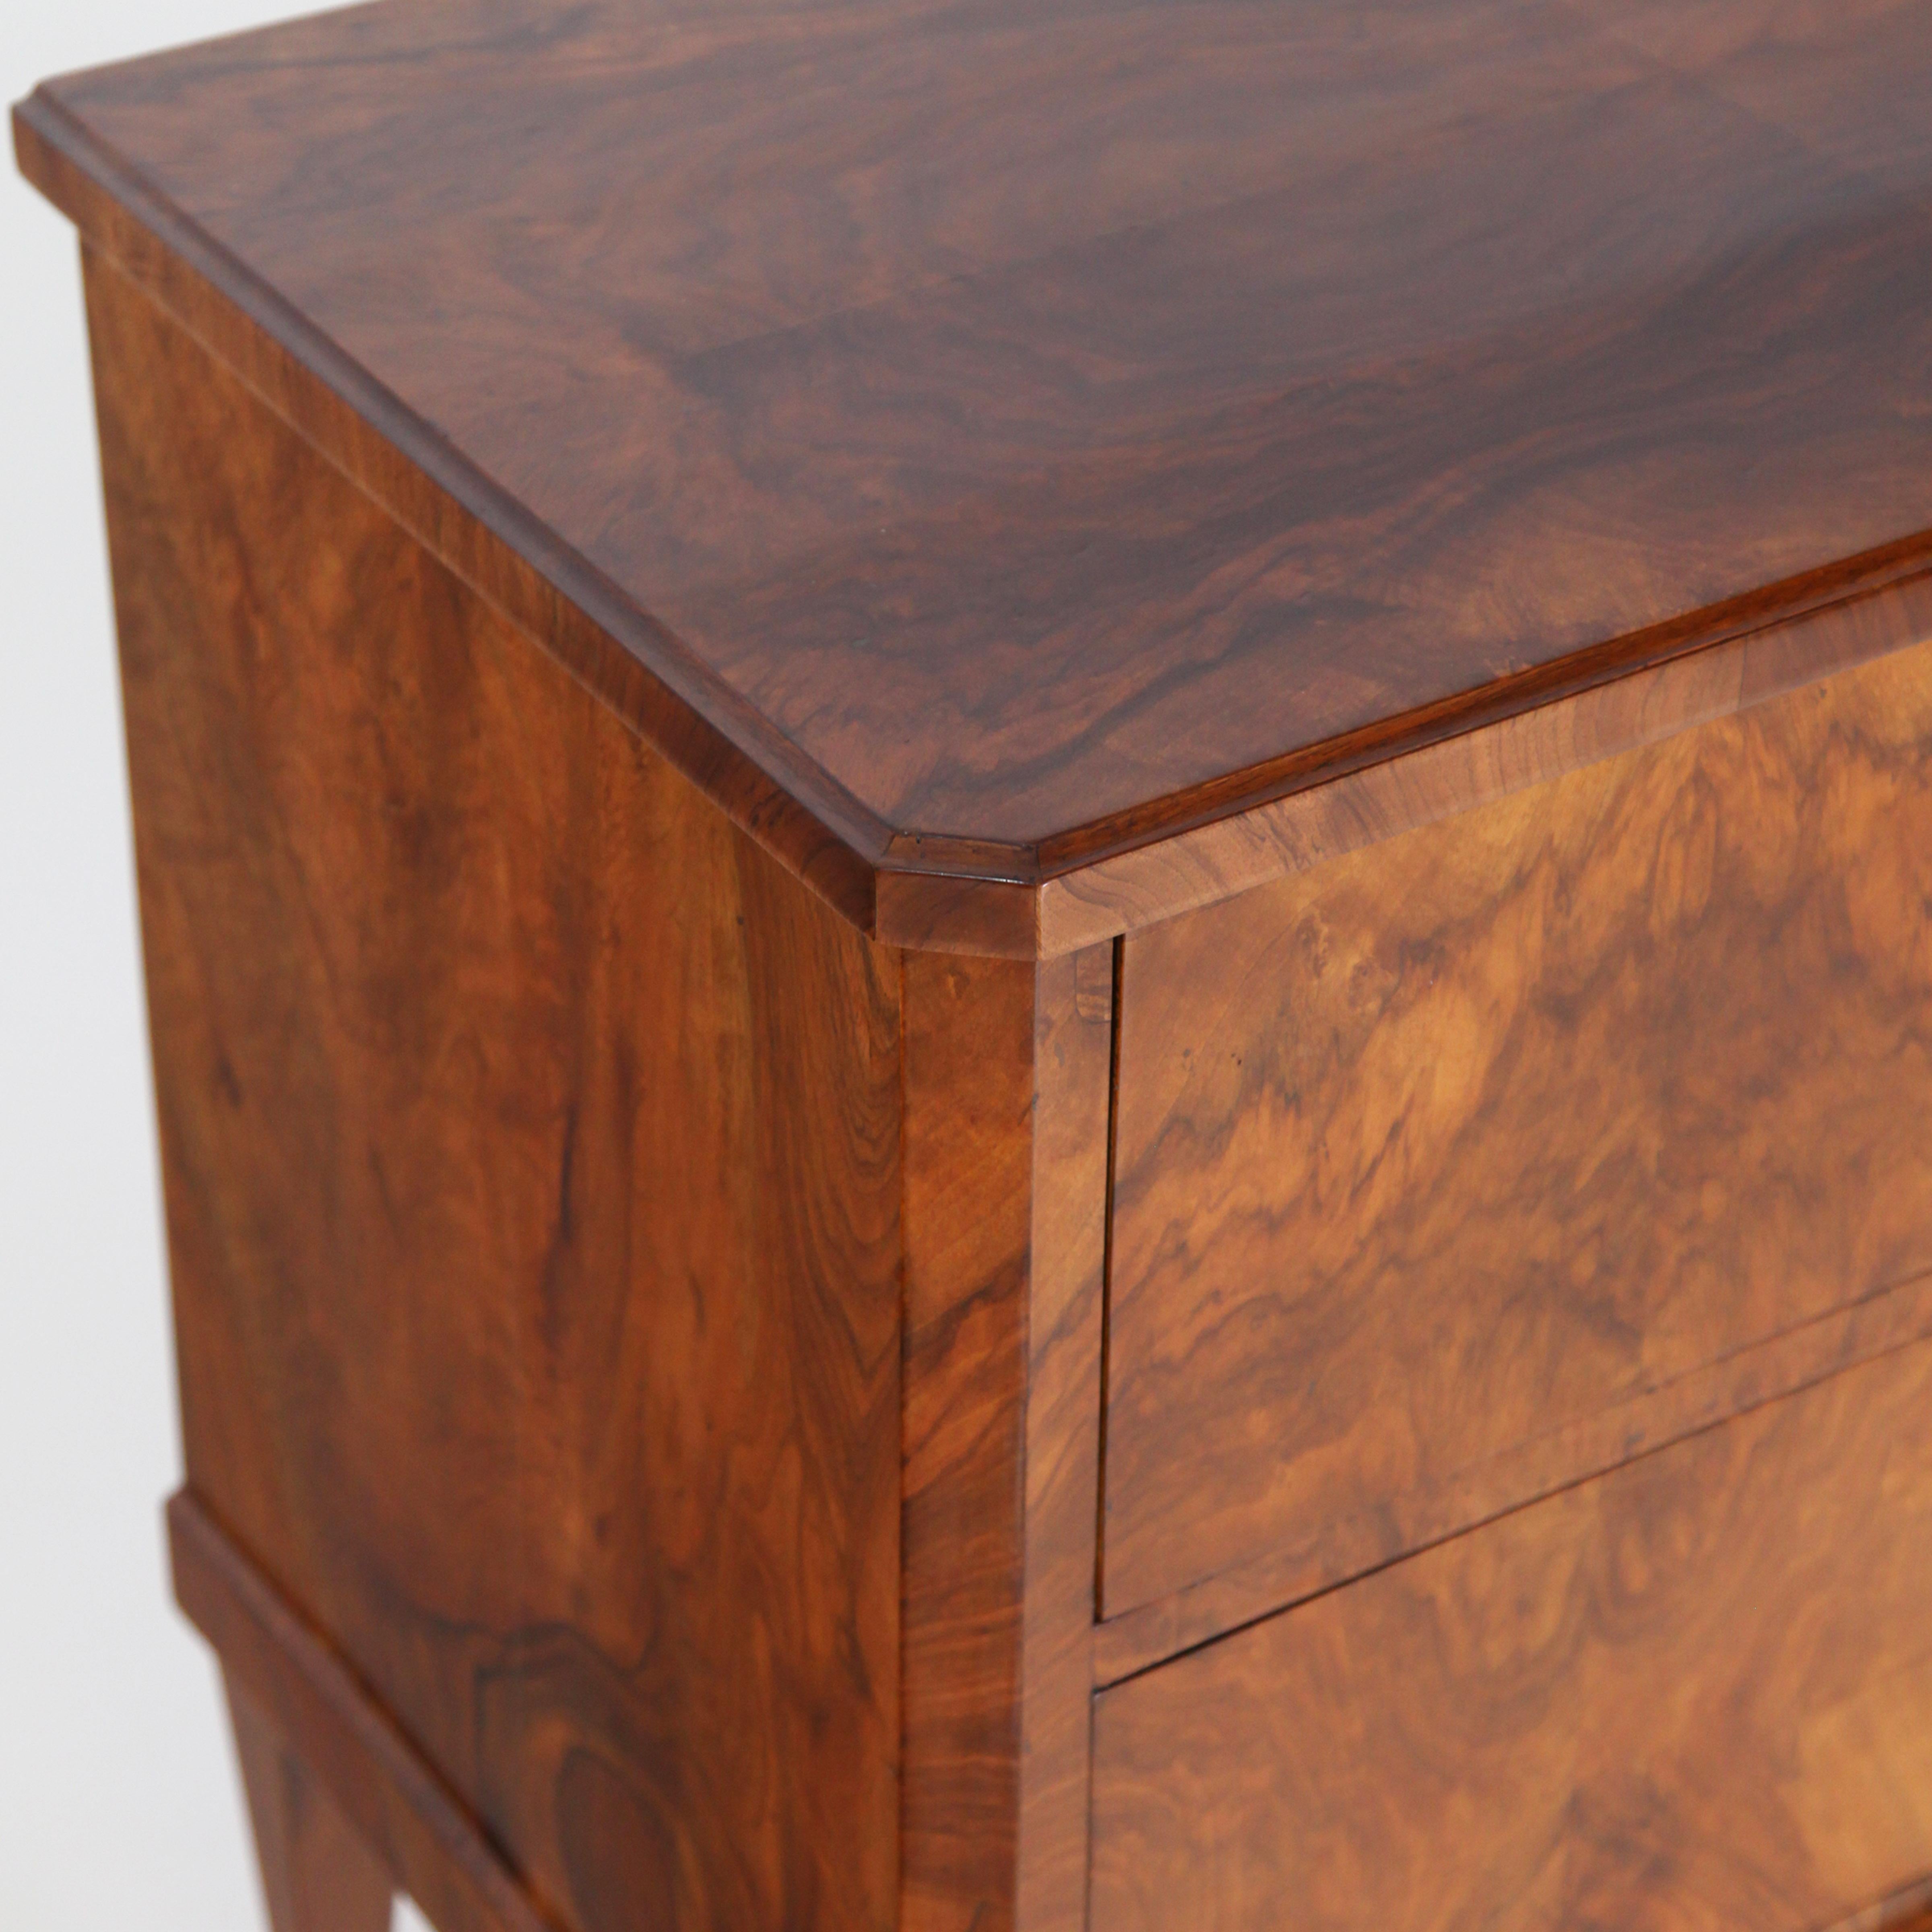 Two-drawered chest of drawers standing on pentagonal pointed feet with bevelled corners and very beautiful flamed walnut veneer. The keyholes with original leather fittings. Very nice restored and hand polished condition.
  